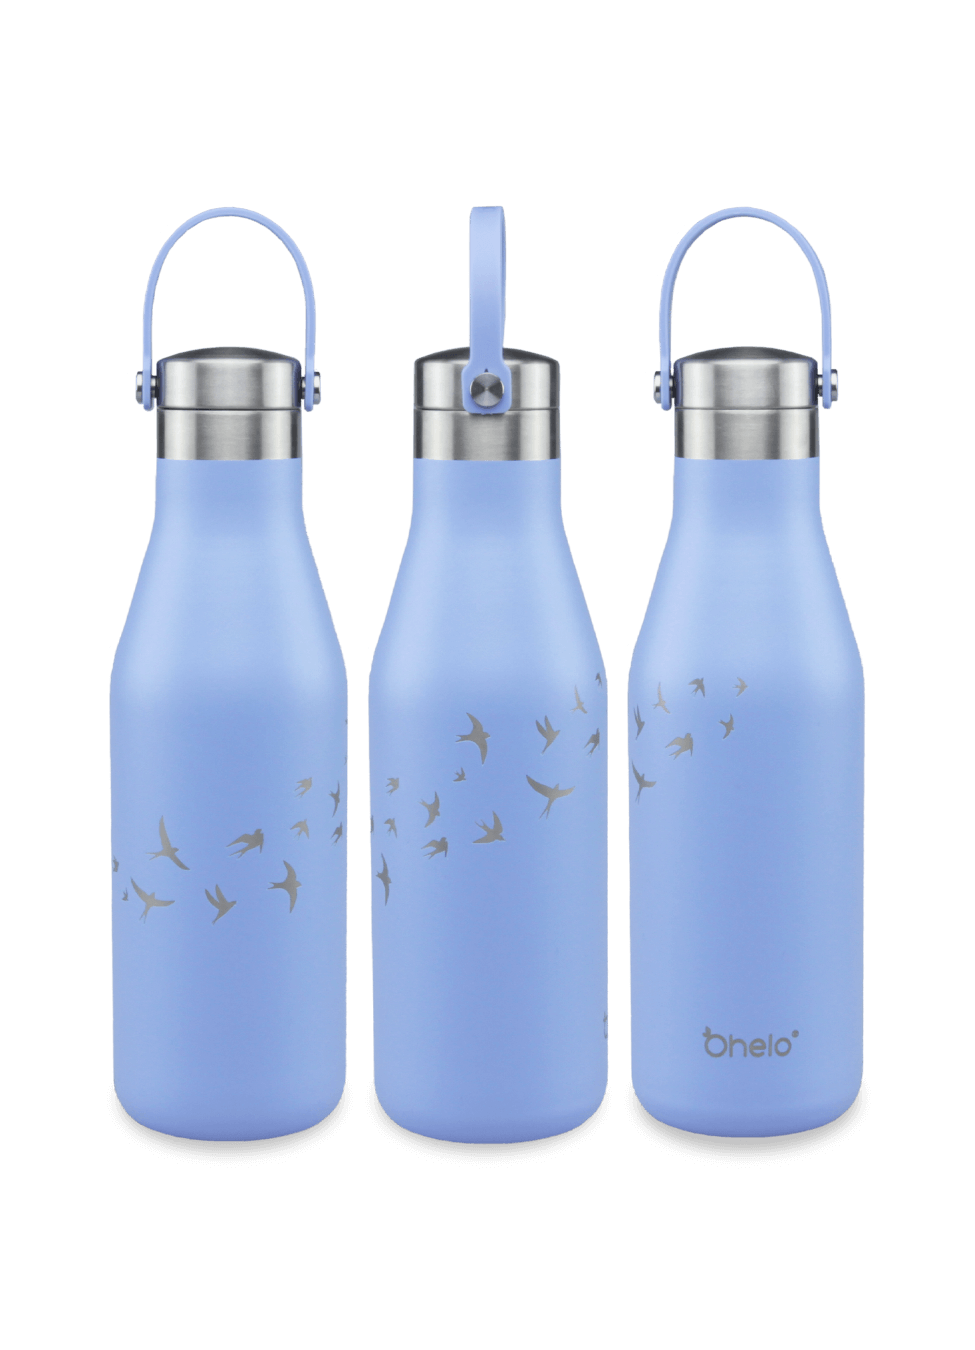 Ohelo Blue Water Bottle with Swallows design3 sides